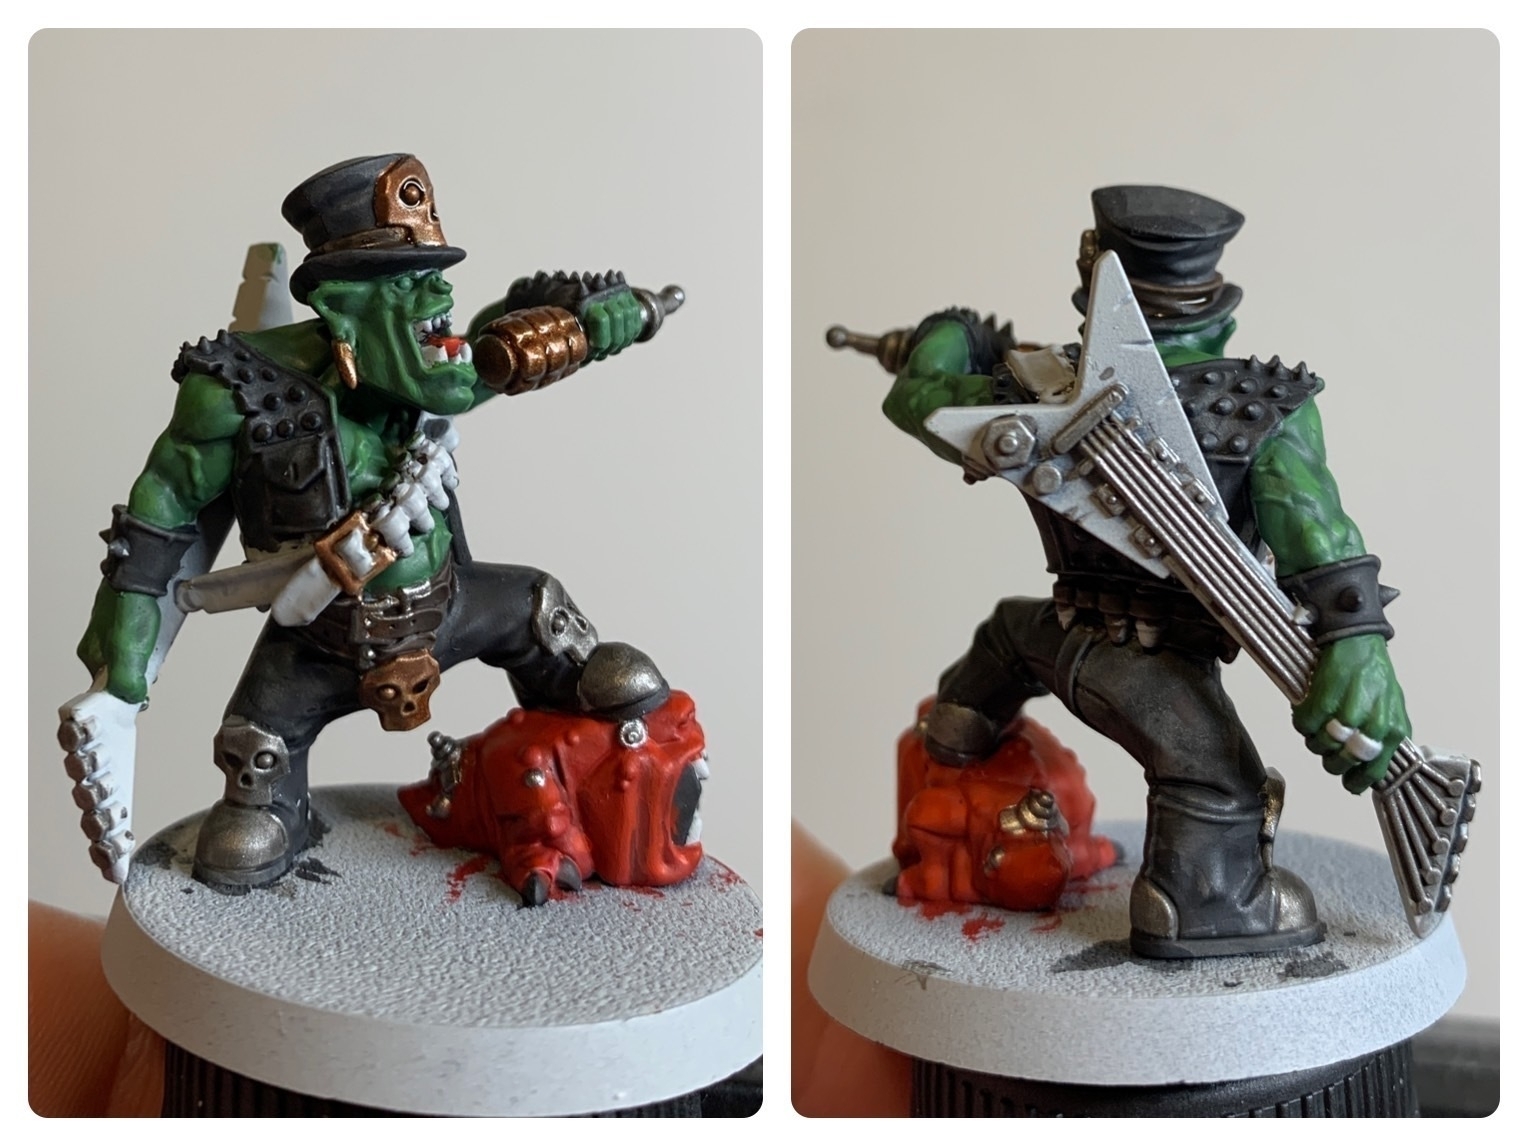 A front and rear shot of my half painted Goff Rocker Ork miniature.The ork is posed with one foot raised on a squig, their left arm holding a microphone up to sing into and the other holding a guitar that's strapped to their back. He is wearing biking leathers and a hat. I have painted most of the orks skin in a dark green with some highlighting and shadows. I have painted the leathers black. The squig is painted a bright red. The guitar is unpainted. Various metal accents are in a mix of bronze and silver colours